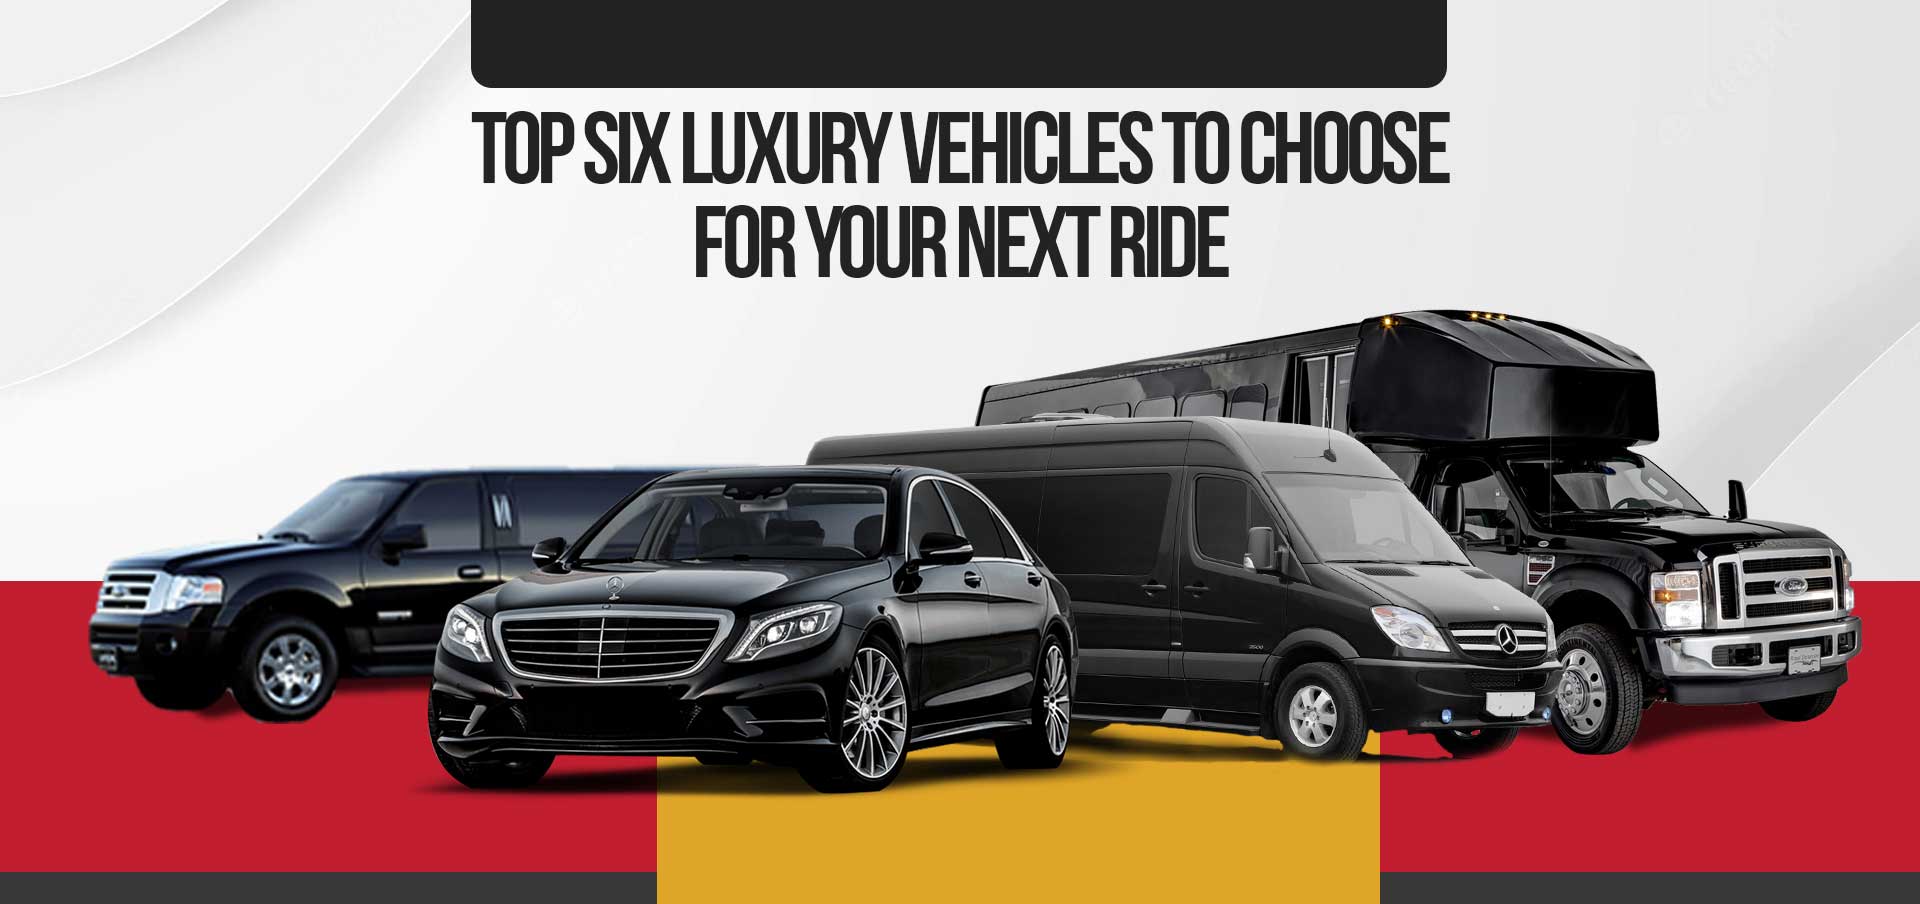 Top 6 Luxury Vehicles To Choose For Your Next Ride